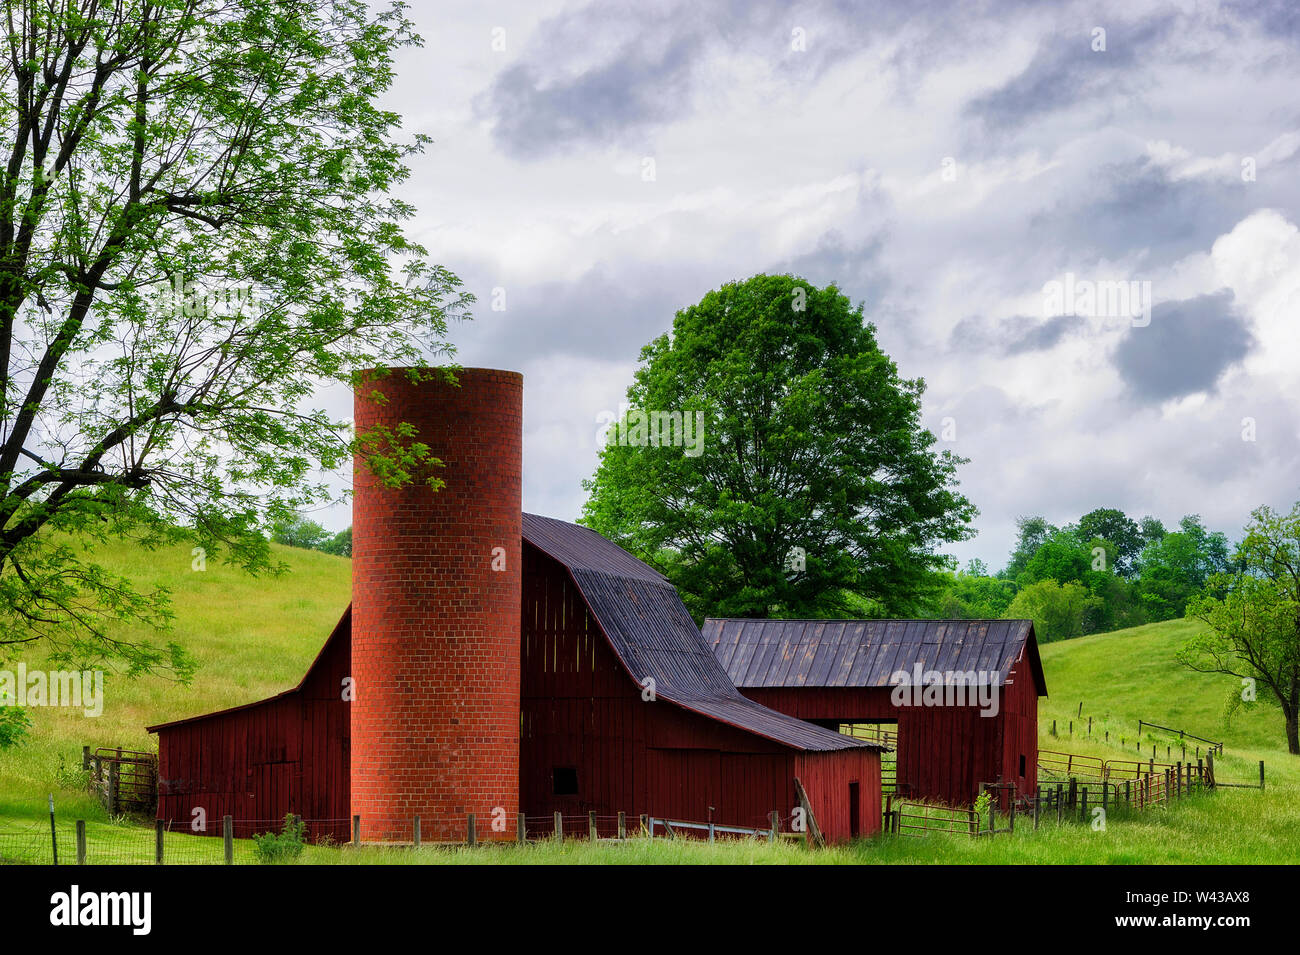 Country side view of a red barn and brick silo on rolling hills in Virginia. Stock Photo